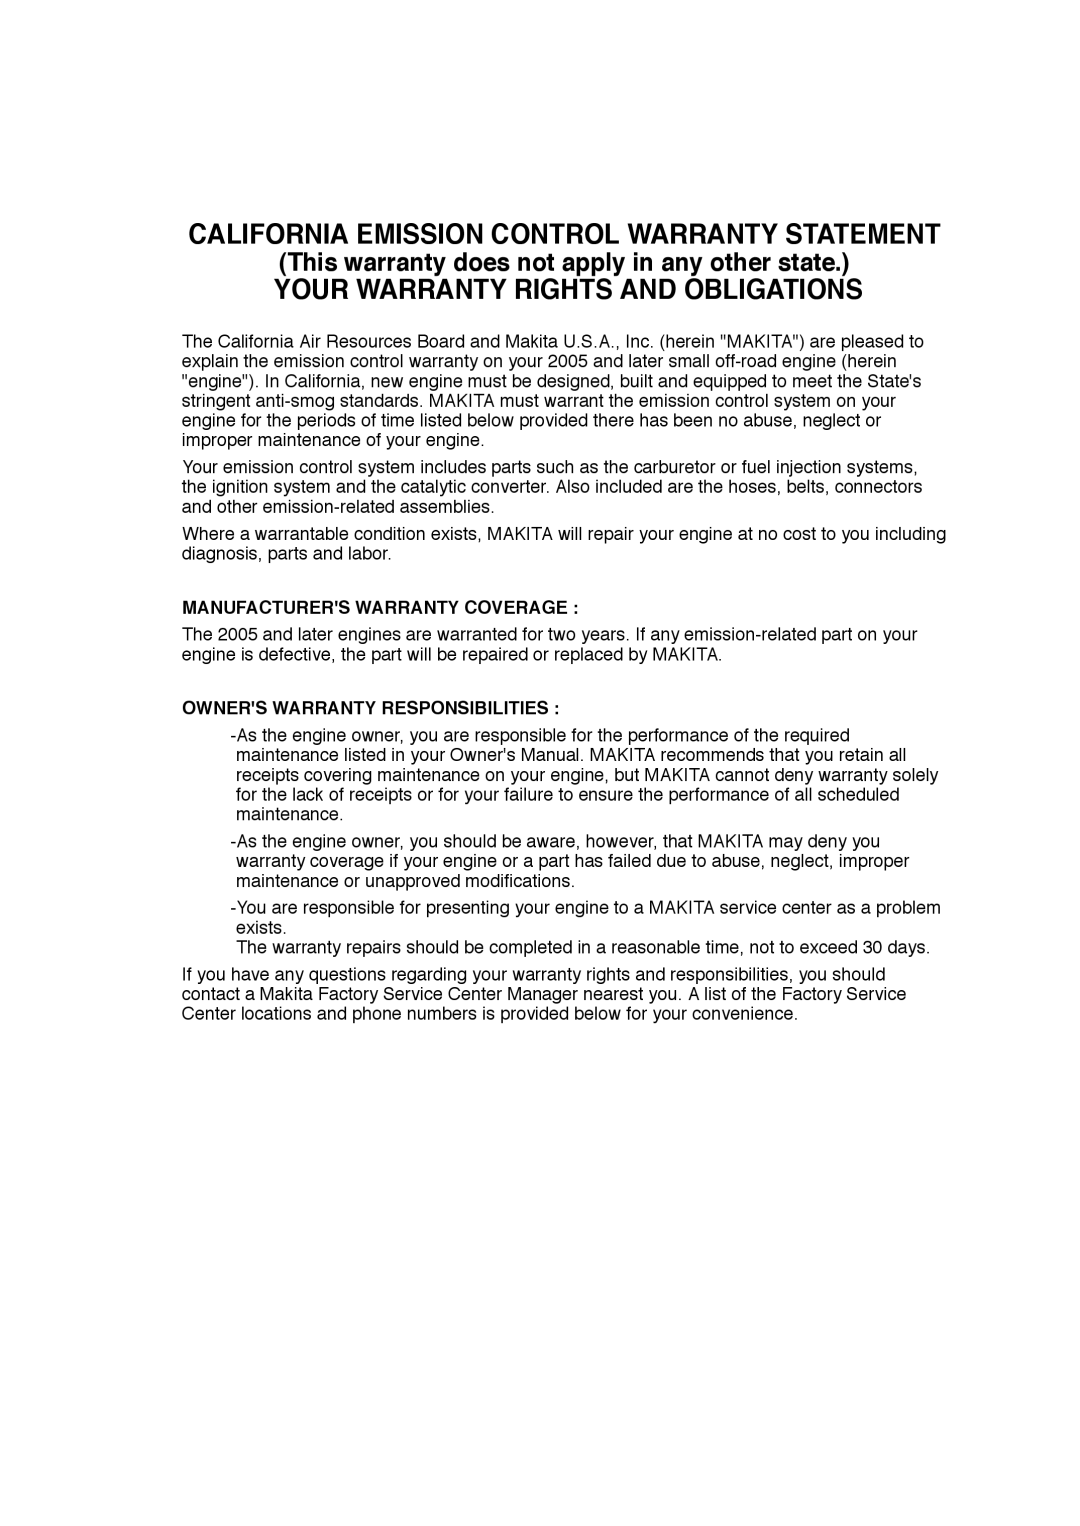 Makita G12010R manual California Emission Control Warranty Statement, Your Warranty Rights And Obligations 